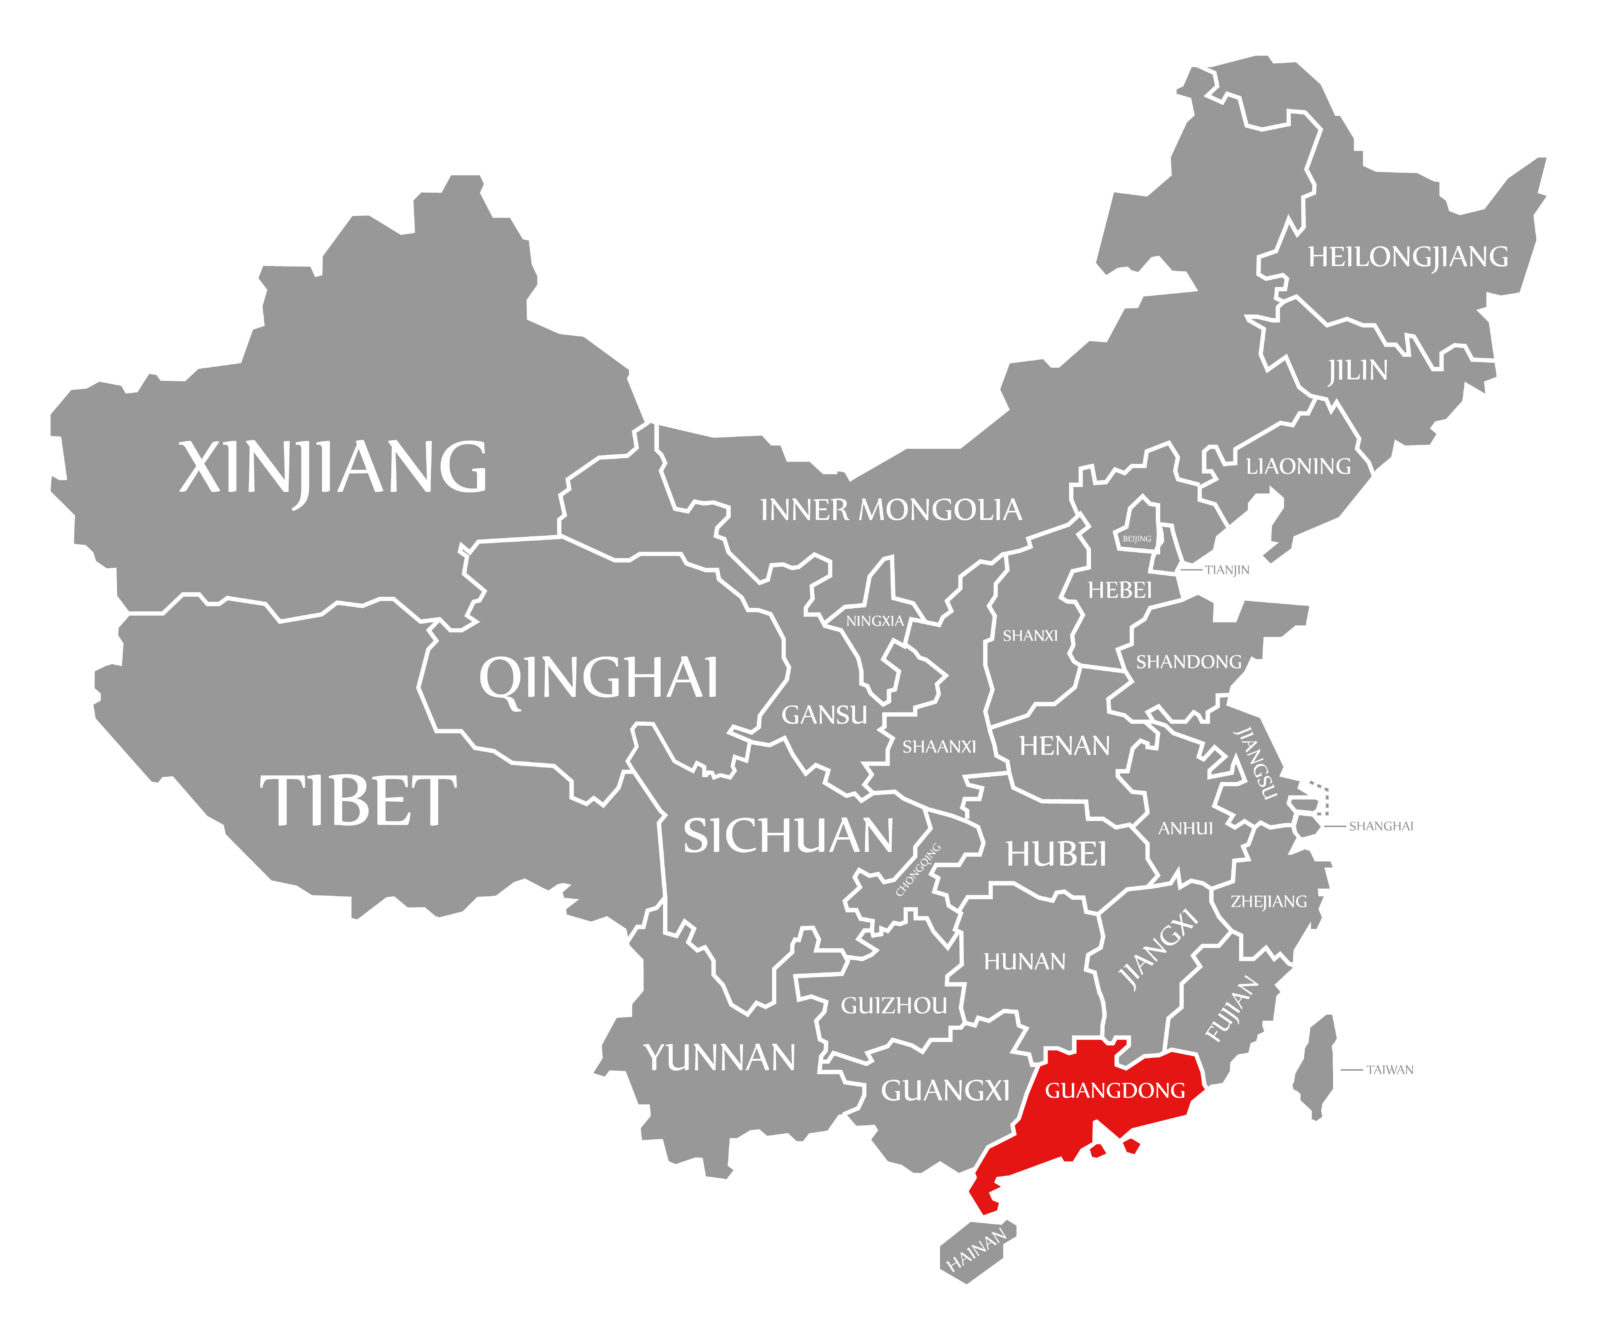 Guangdong red highlighted in map of China